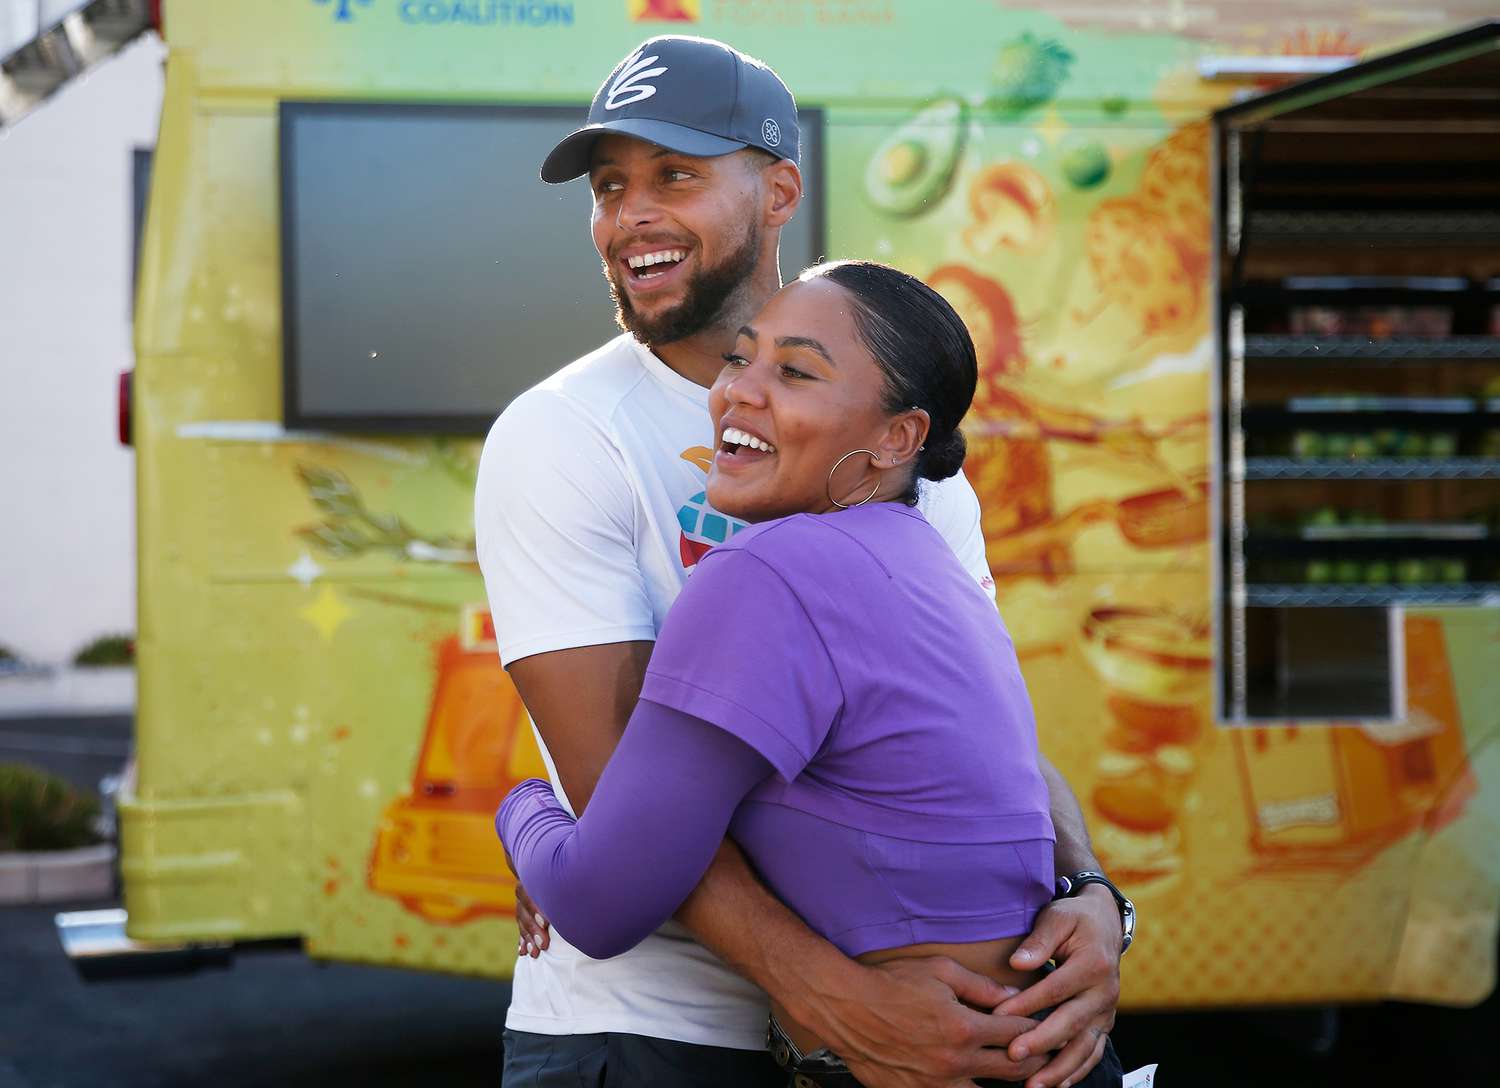 Stephen and Ayesha Curry hug during the unveiling of the Eat. Learn. Play. bus at the East Oakland Youth Development Center in Oakland, Calif